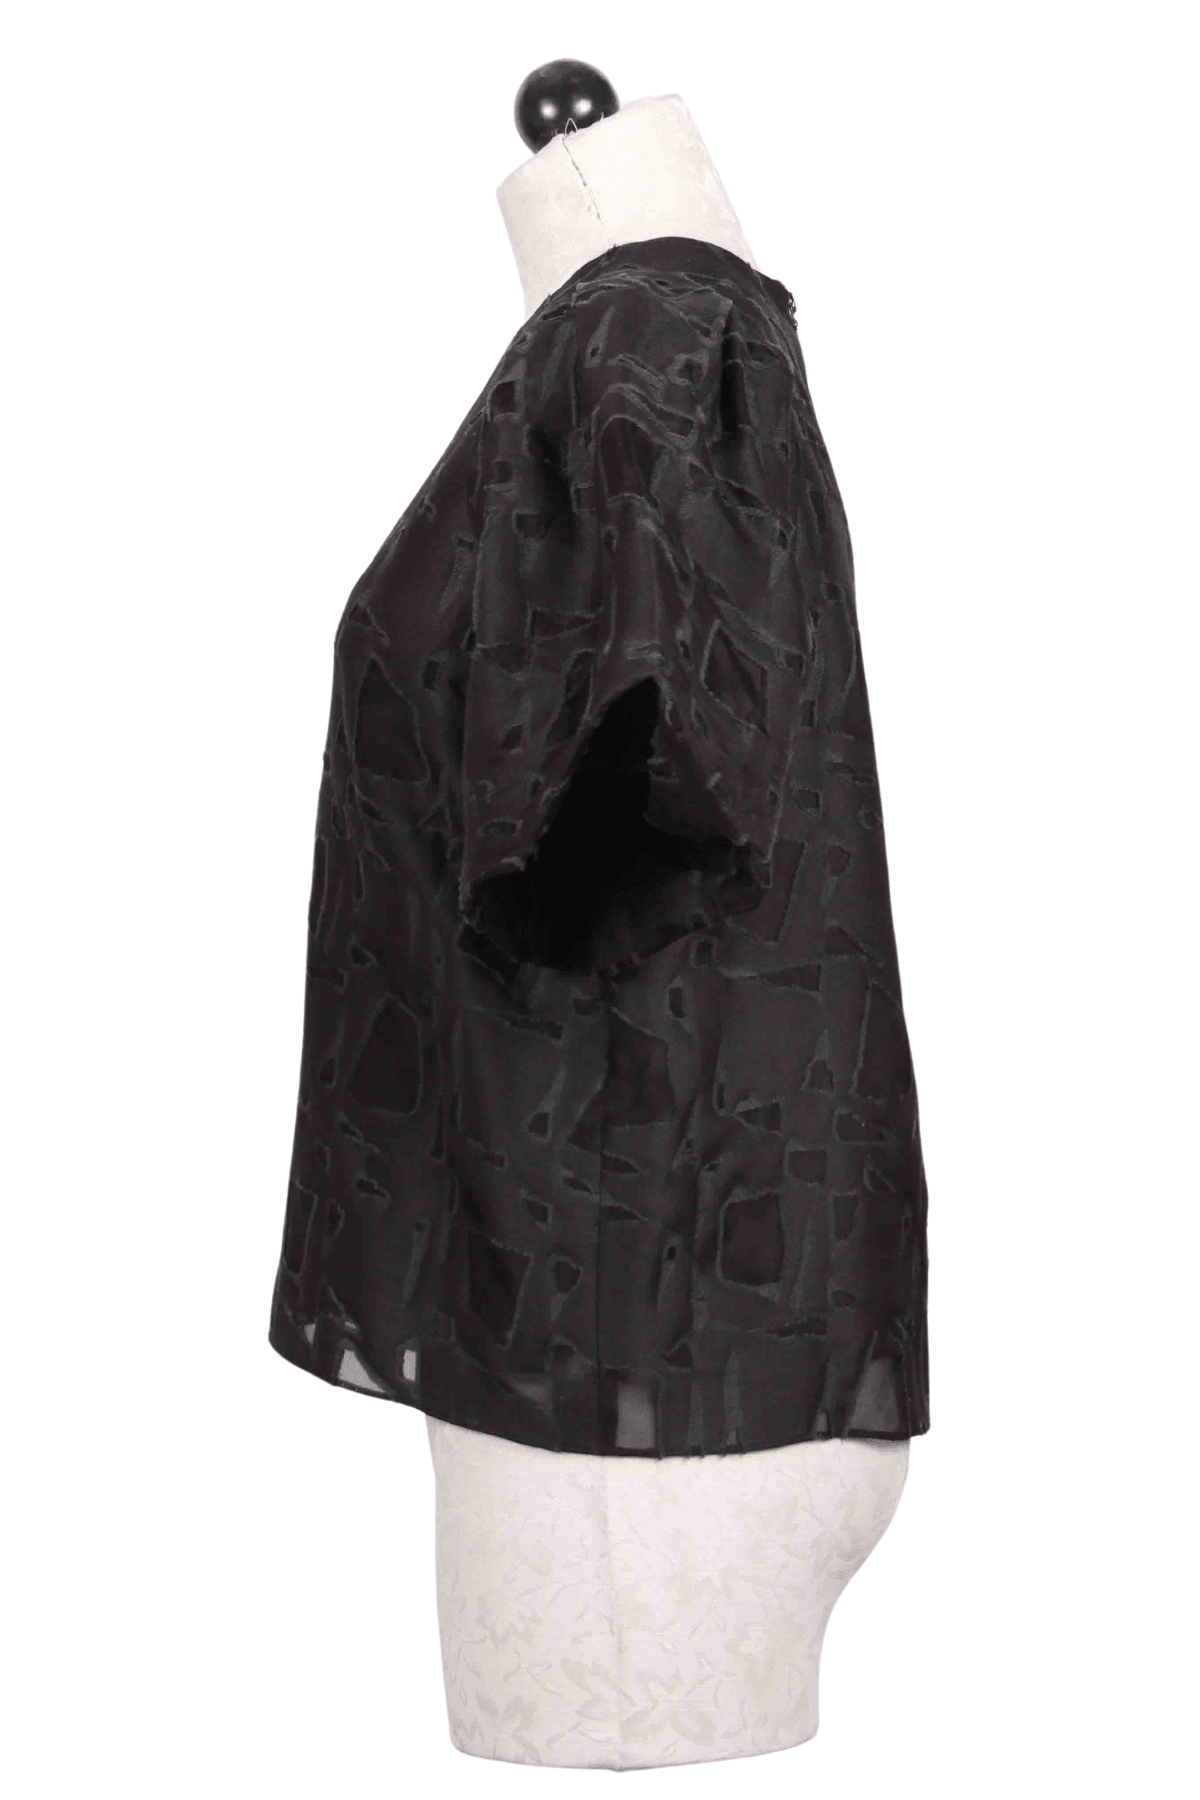 side view of Black Jessa Short Bag Sleeve Top by Marie Oliver in a textured jacquard fabric